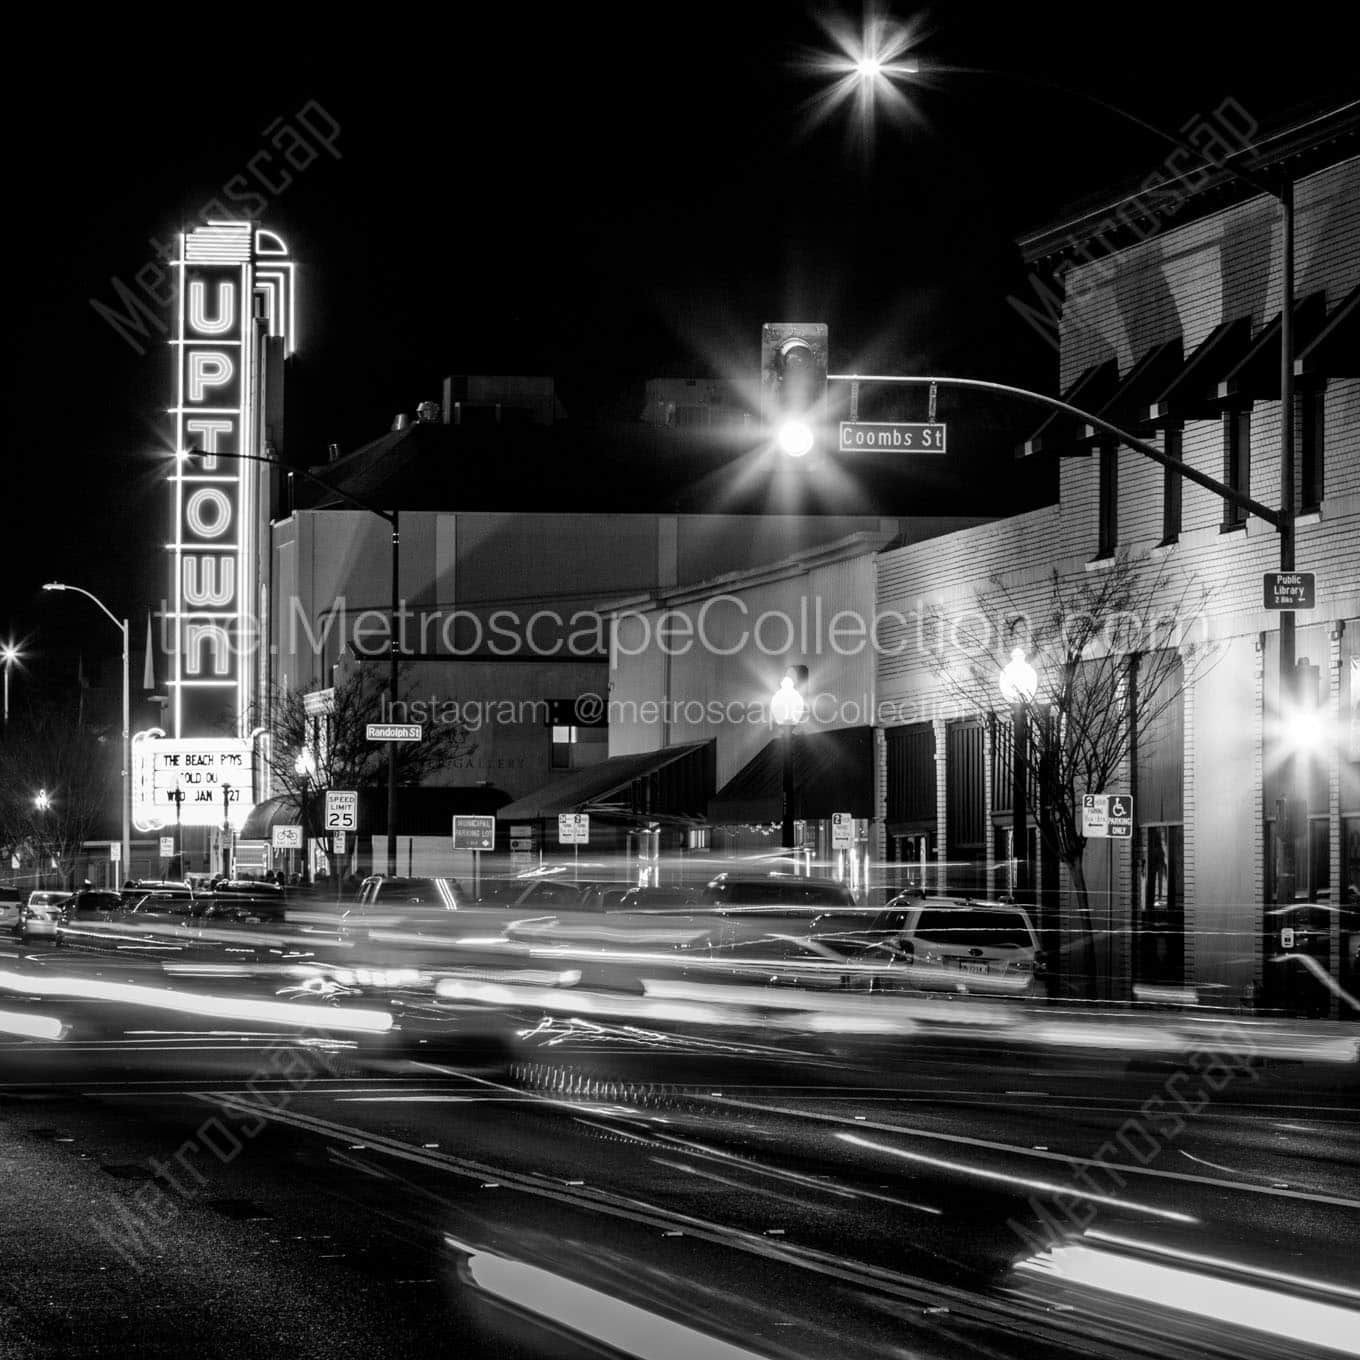 uptown theater at night downtown napa Black & White Office Art